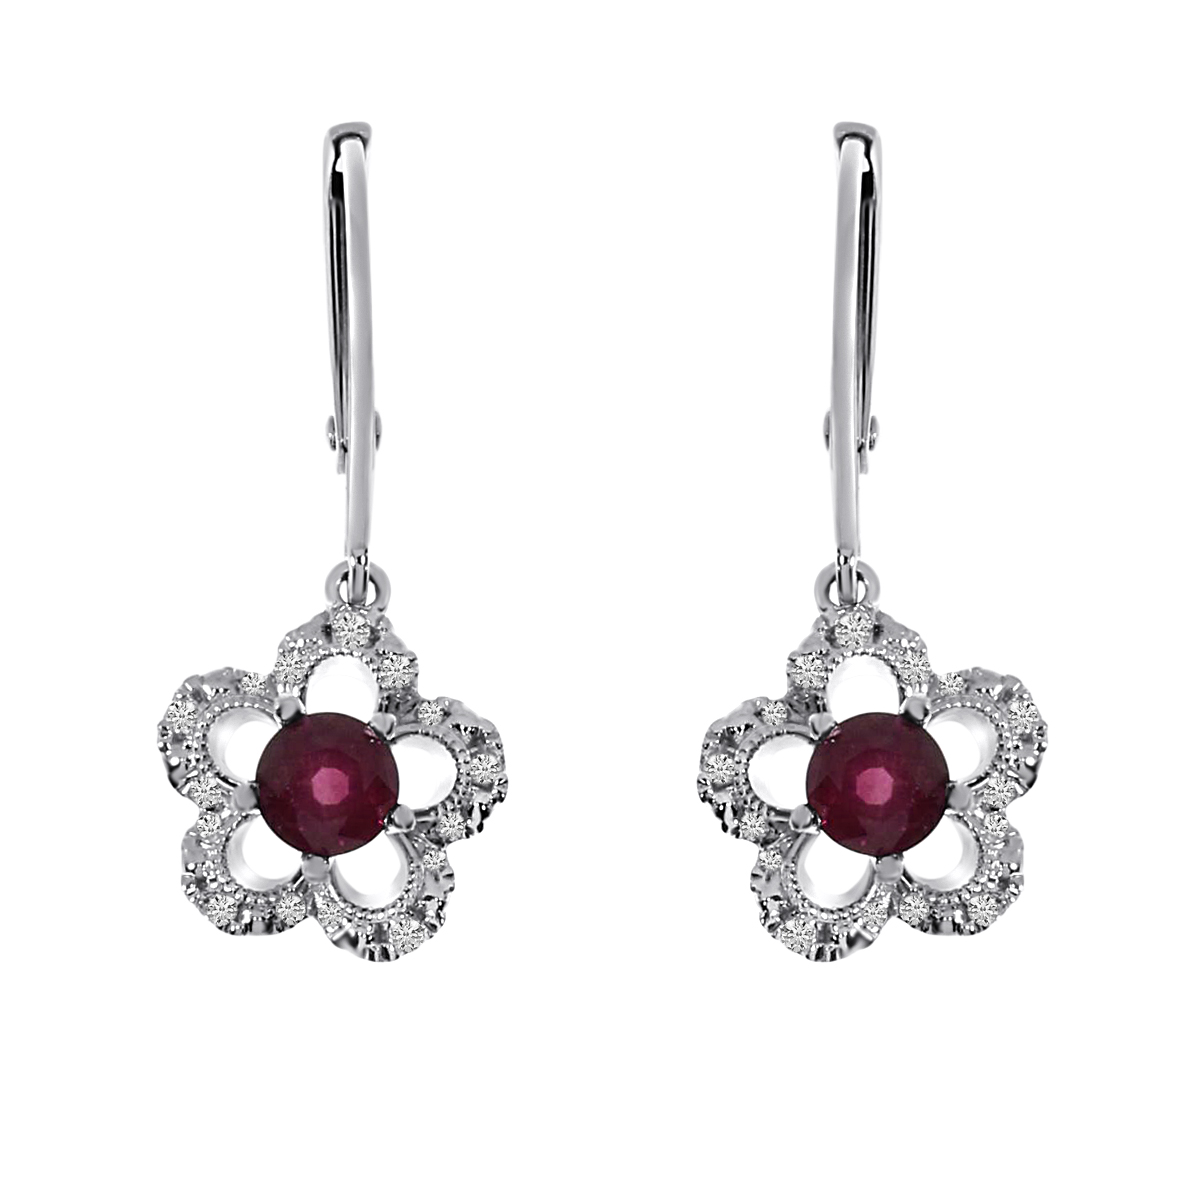 JCX2107: Floral shaped earrings in 14k white gold with 4 mm round rubies and .11 ct diamonds.